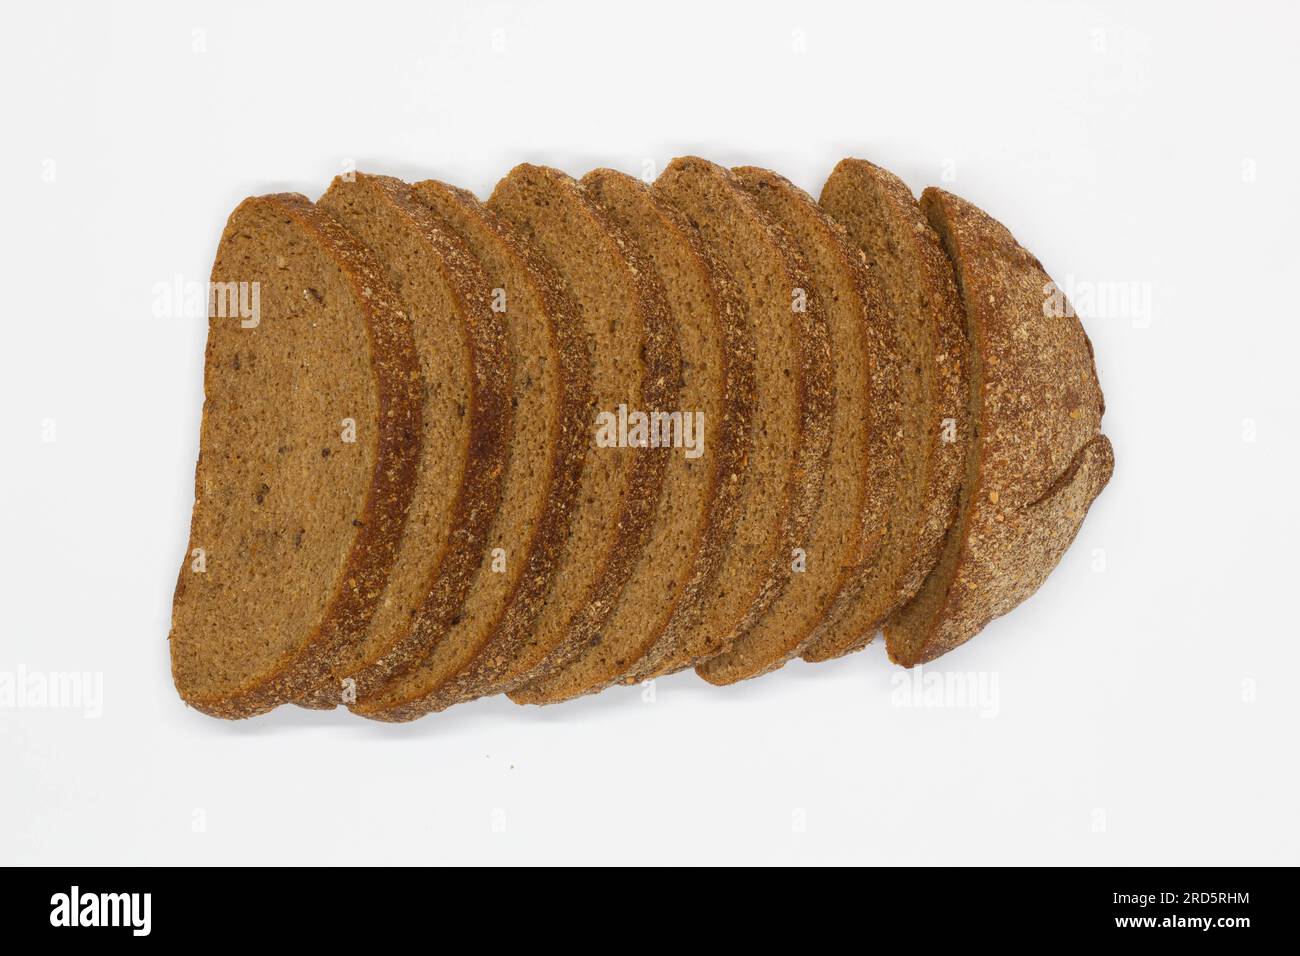 Sliced black bread. Dark rye bread with cumin cut into even pieces on a white background. Wheat black bread on the table. Isolated. Bran from grain. Stock Photo